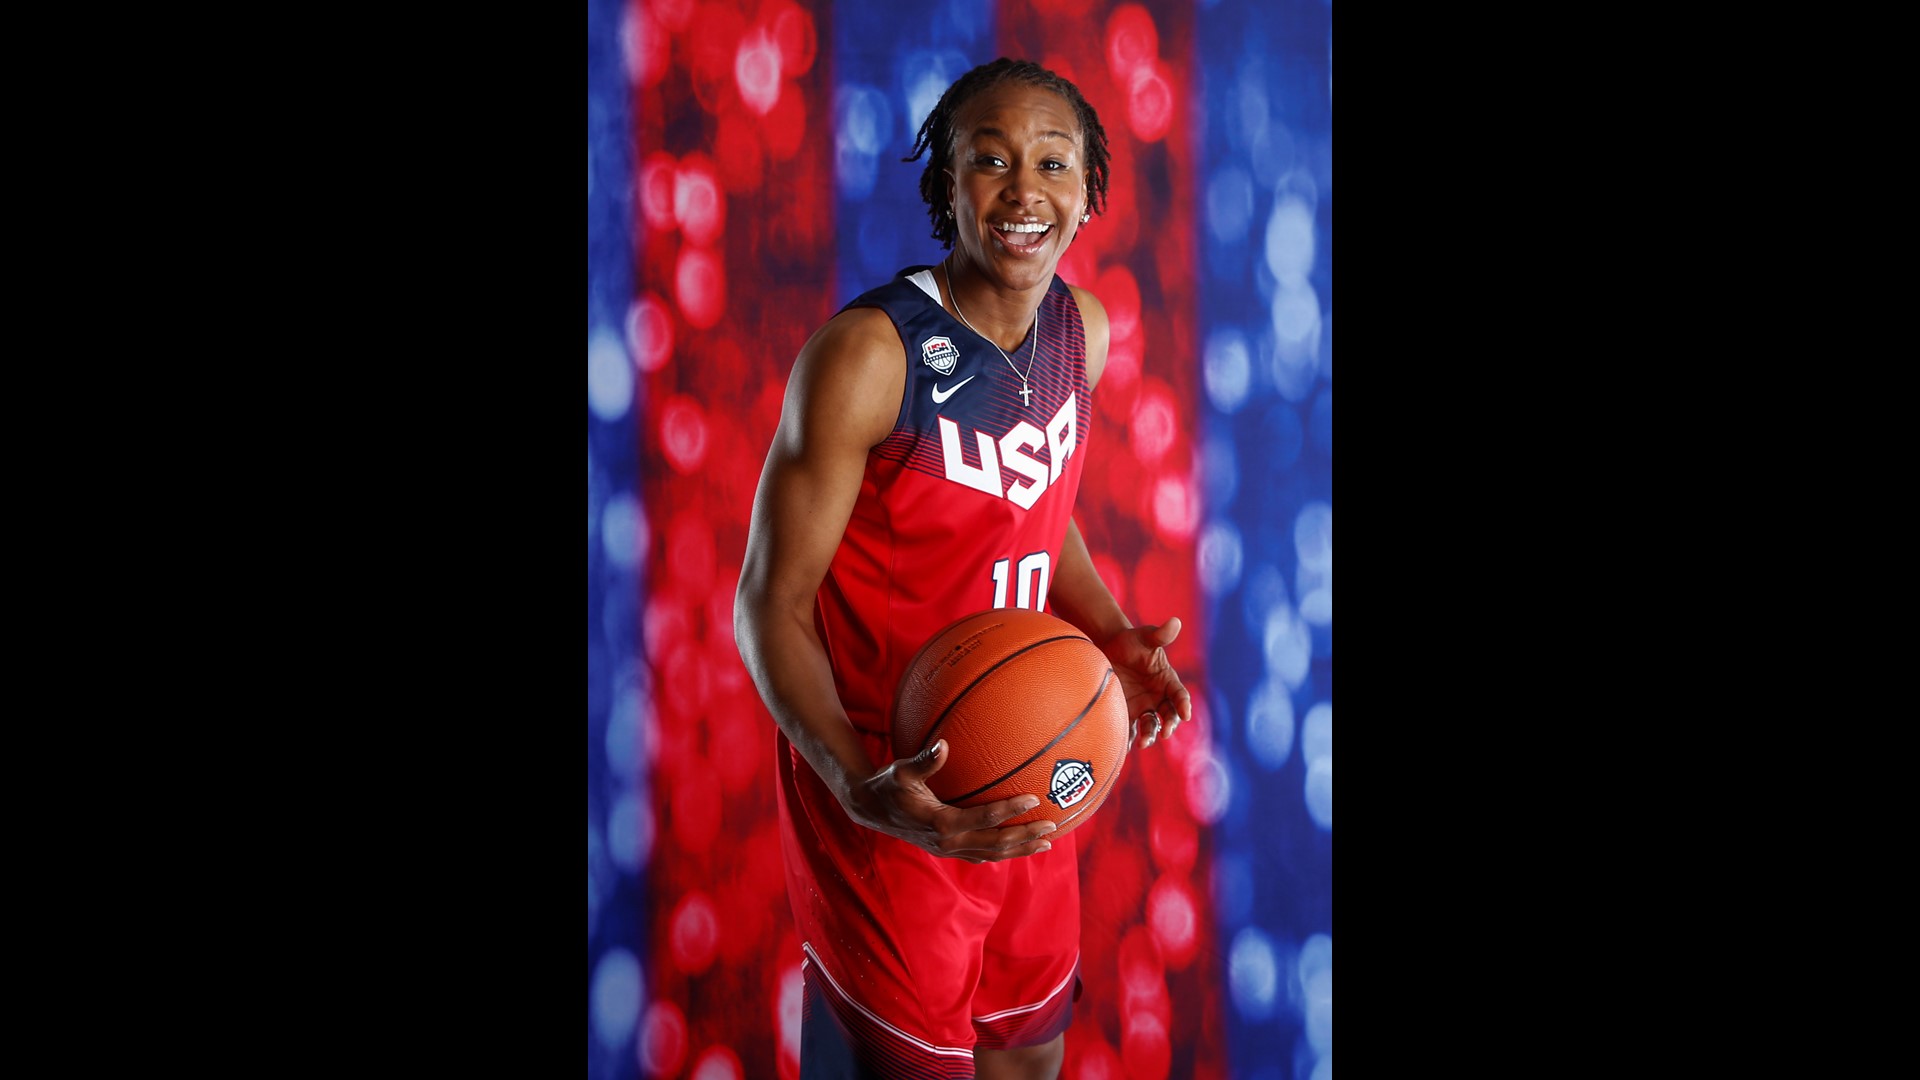 Tamika Catchings will join Pat Summitt and Joan Cronan in the Women's Basketball Hall of Fame.